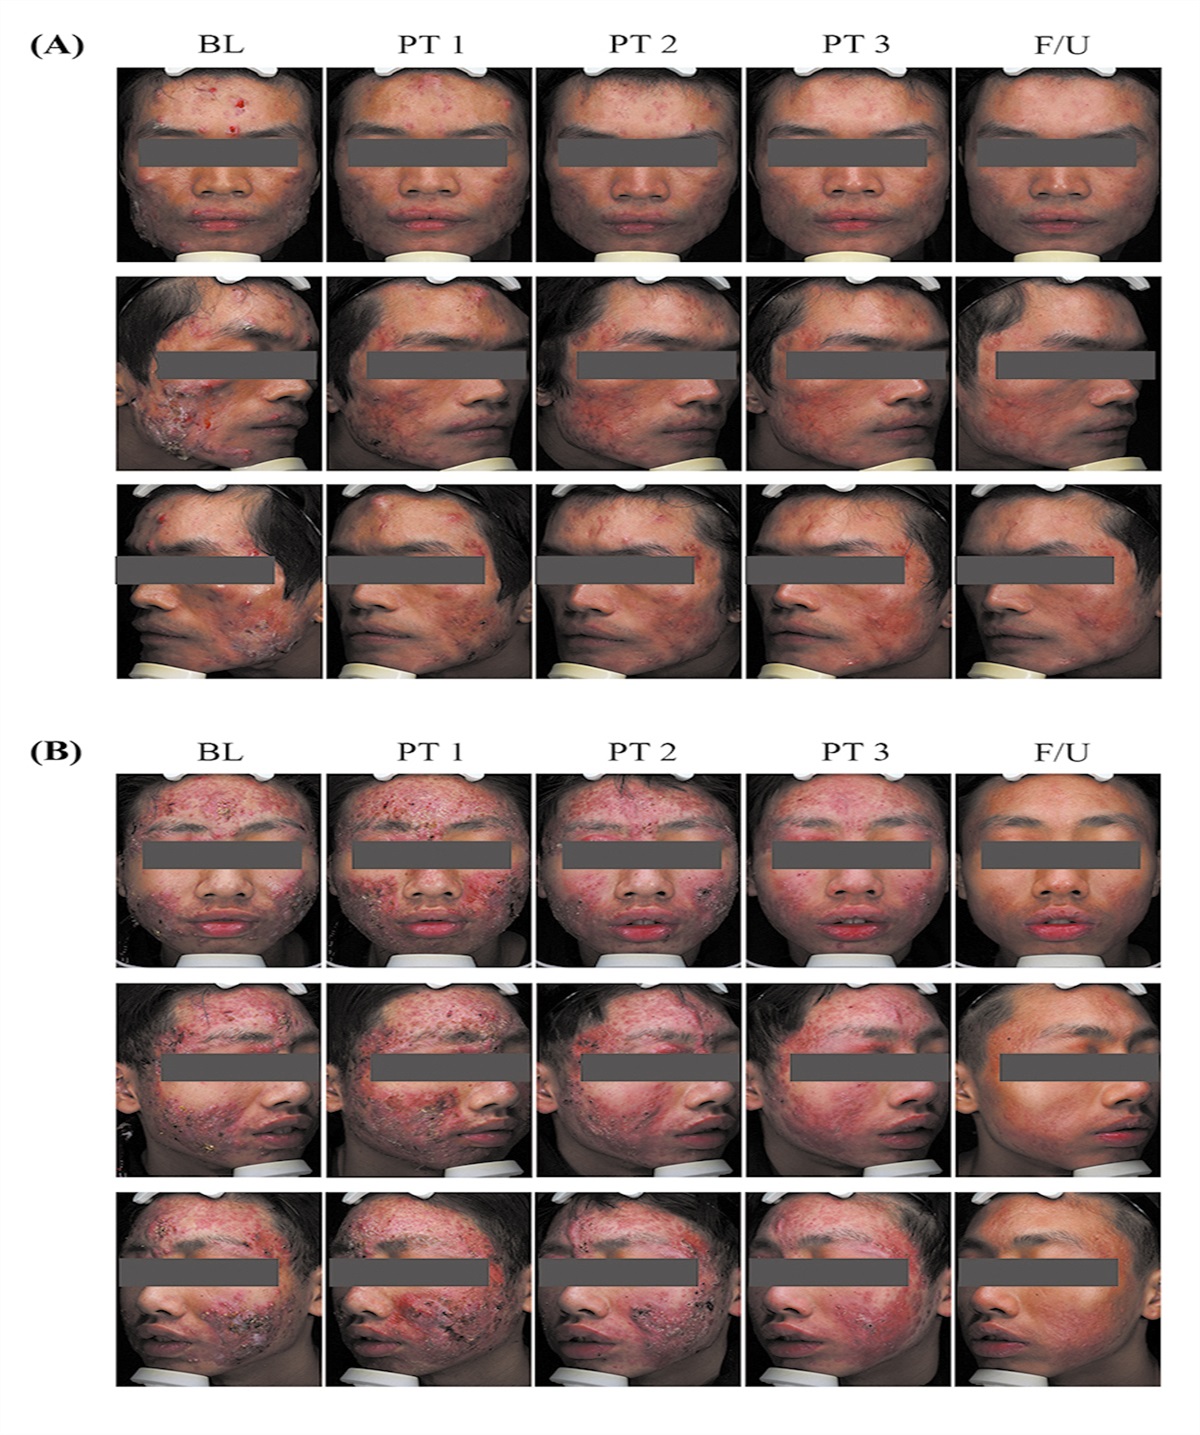 Efficacy and safety of single microneedle radiofrequency vs. photodynamic therapy on moderate-to-severe acne vulgaris: A prospective, randomized, controlled study